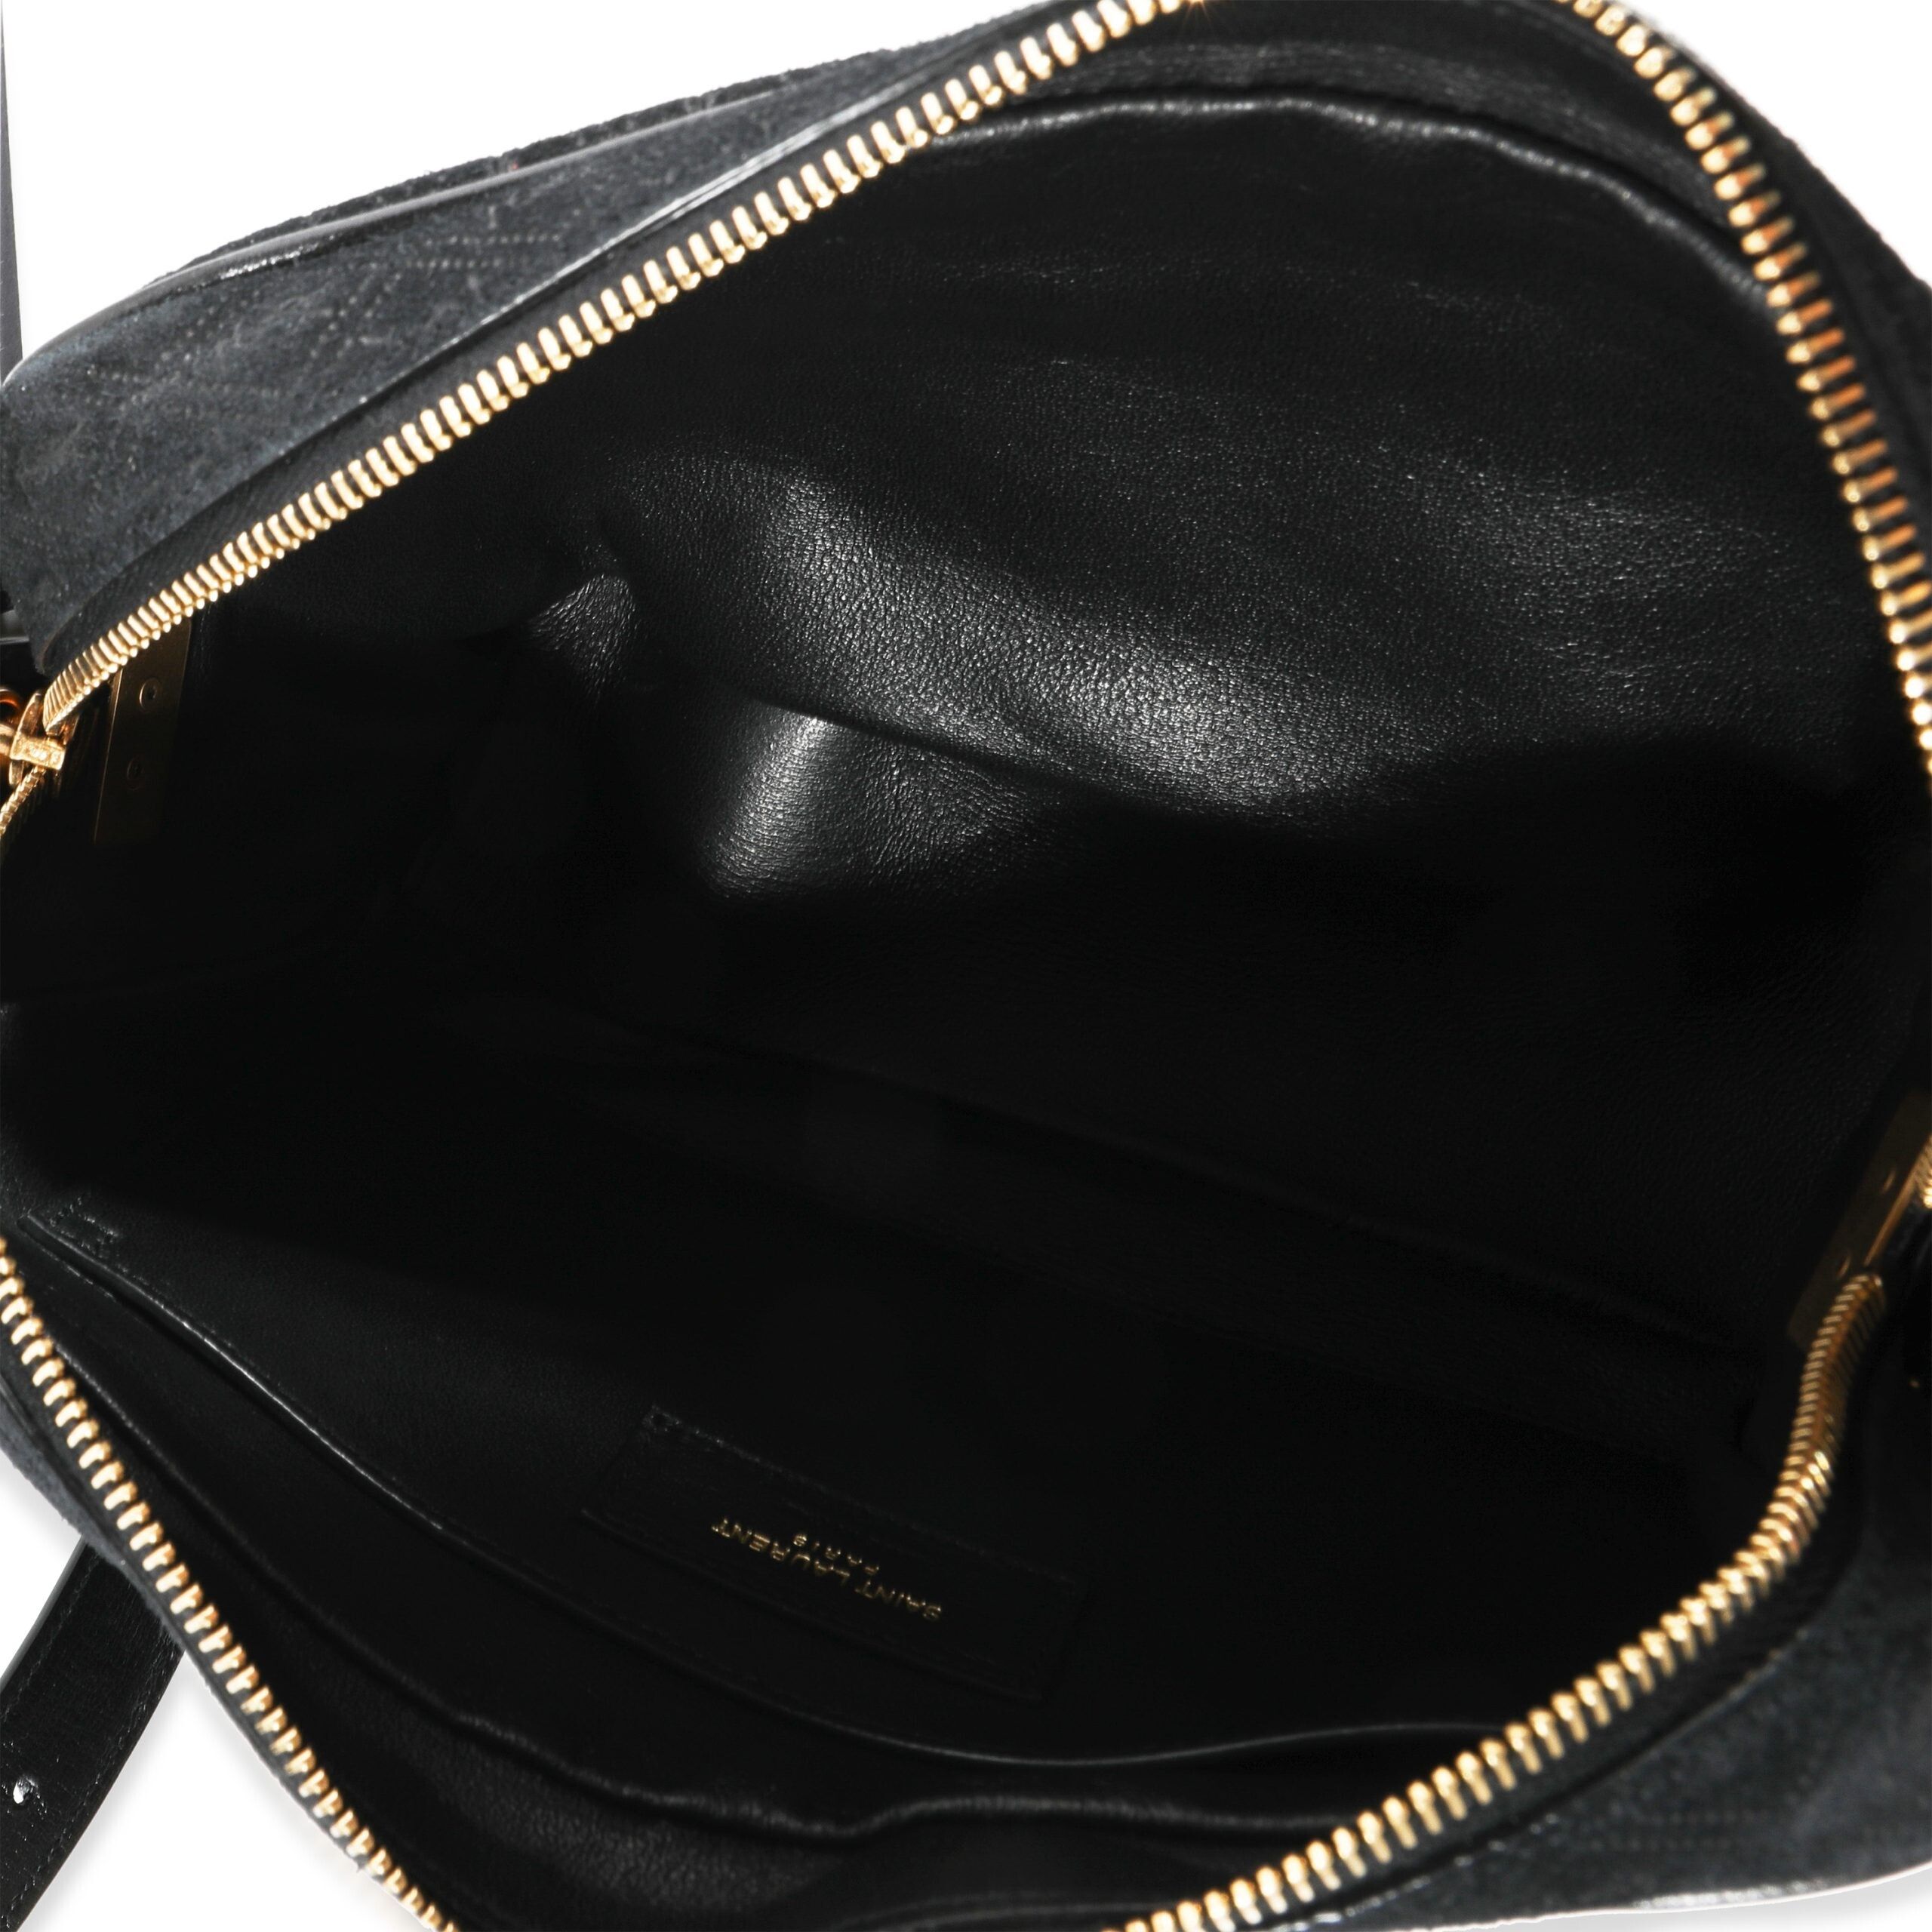 Yves Saint Laurent Yves Saint Laurent Black Suede & Leather All-Over Monogram Camera Bag Size ONE SIZE - 4 Preview